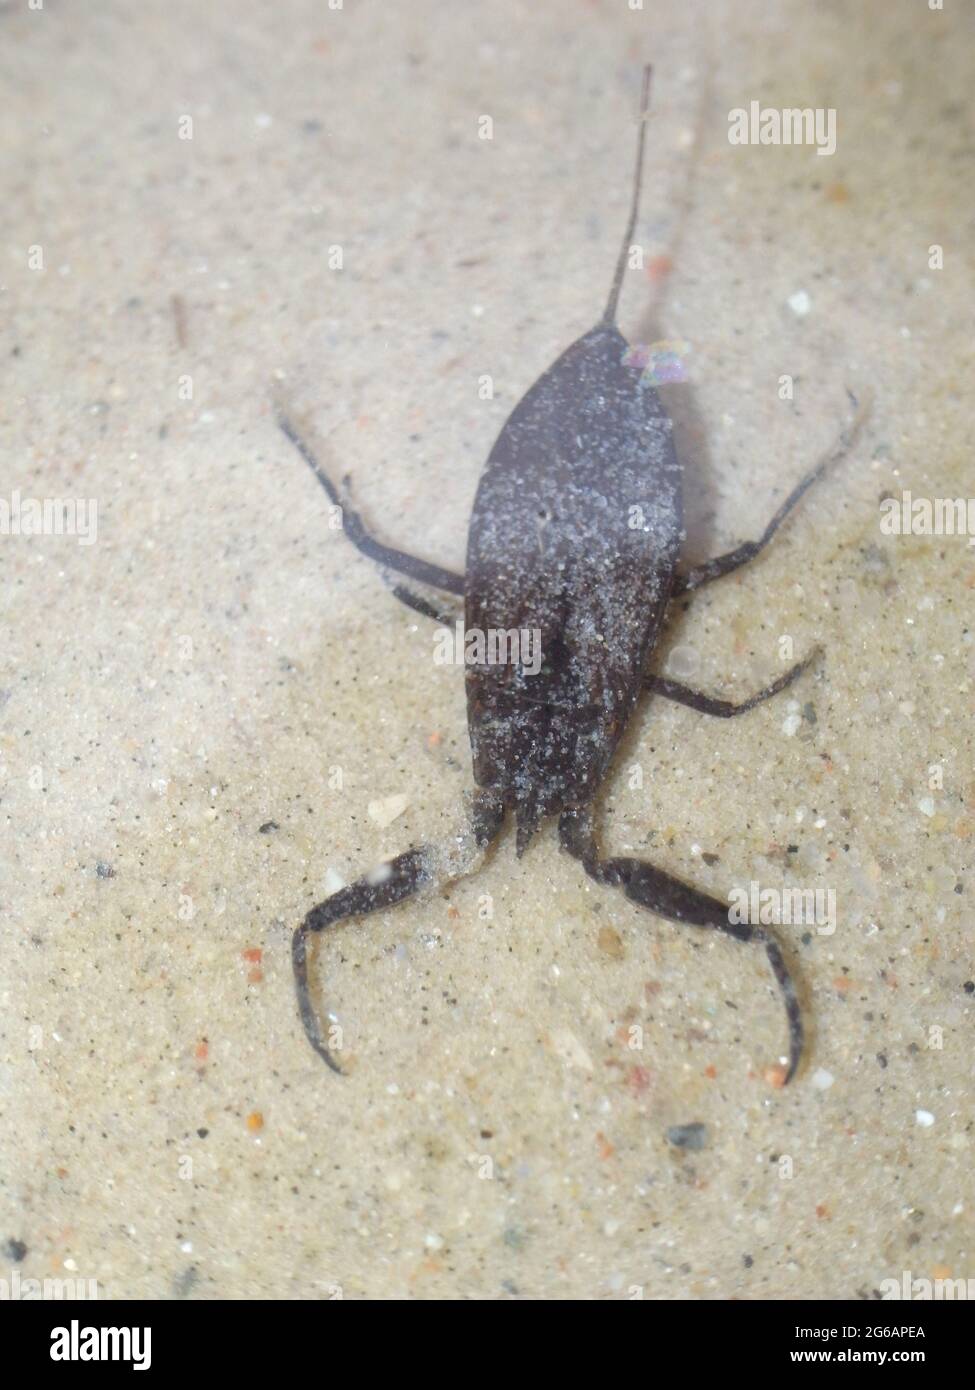 Water scorpion (Nepa cinerea). Predatory aquatic bug in the family Nepidae, with caudal process that acts as breathing tube. Stock Photo